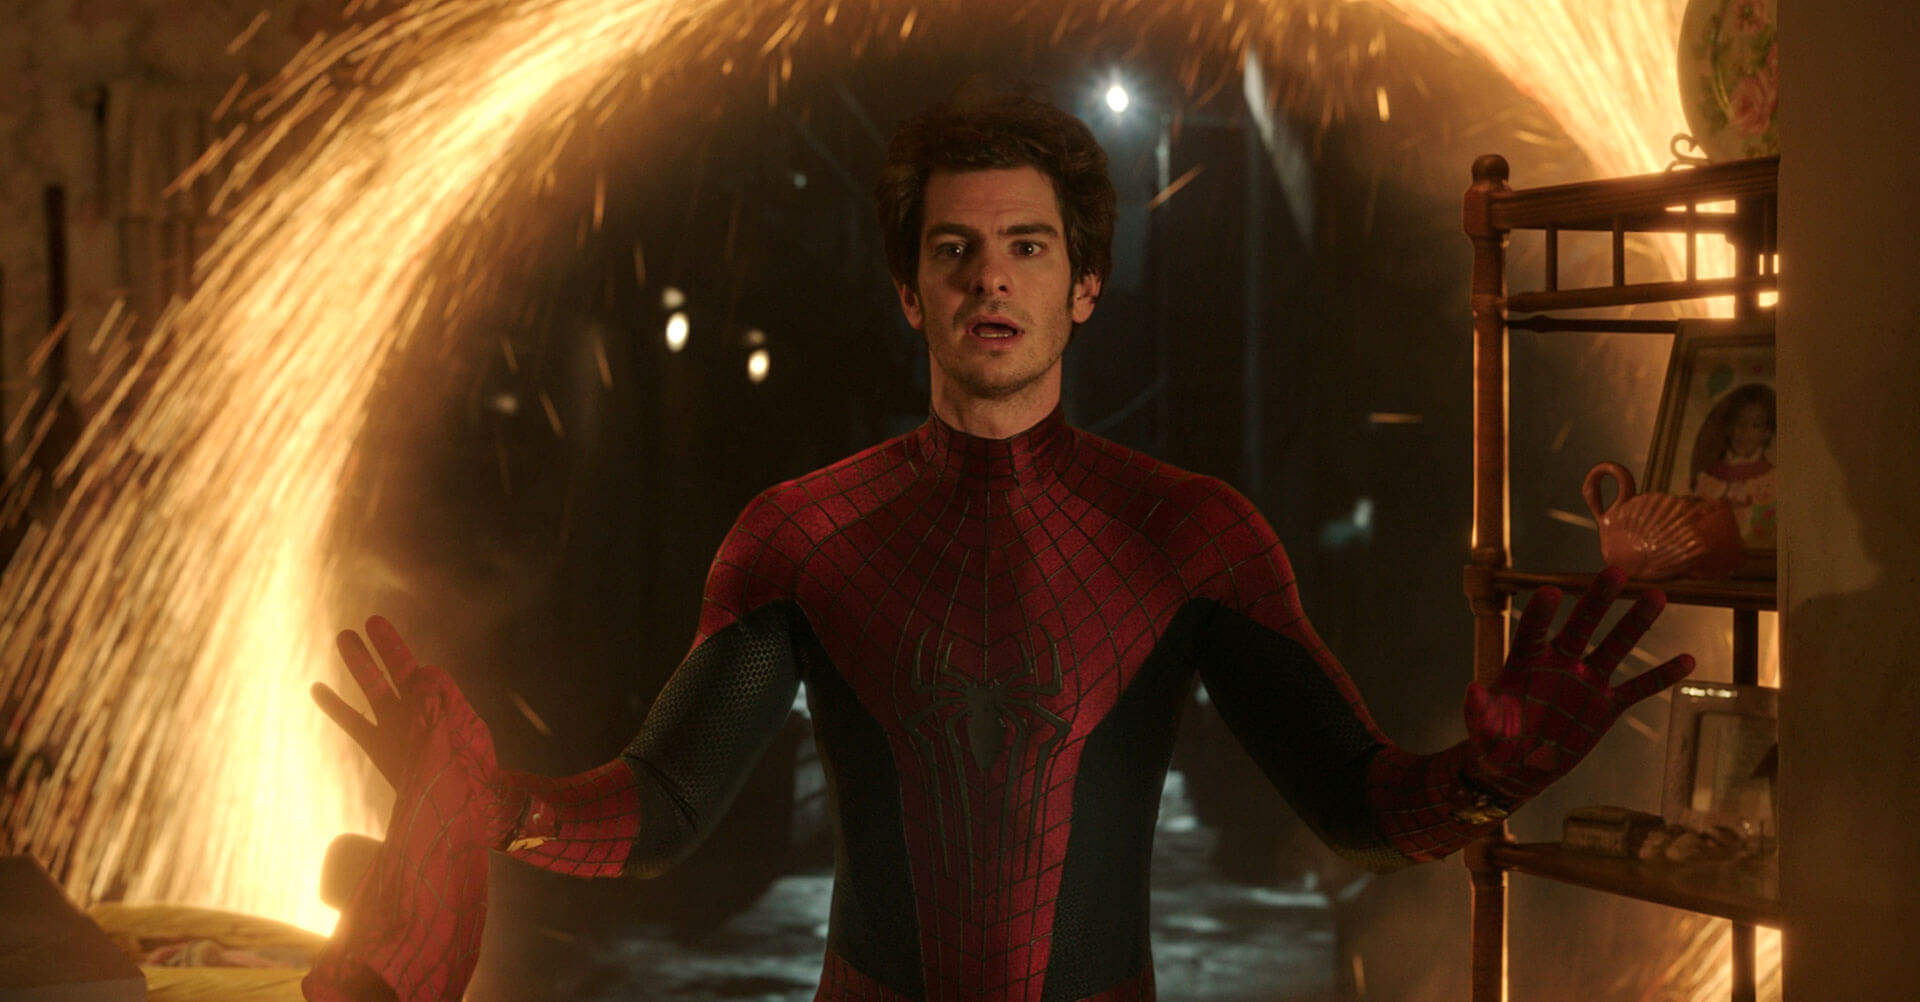 Fans wants Andrew Garfield to star in a new Spider-Man movie